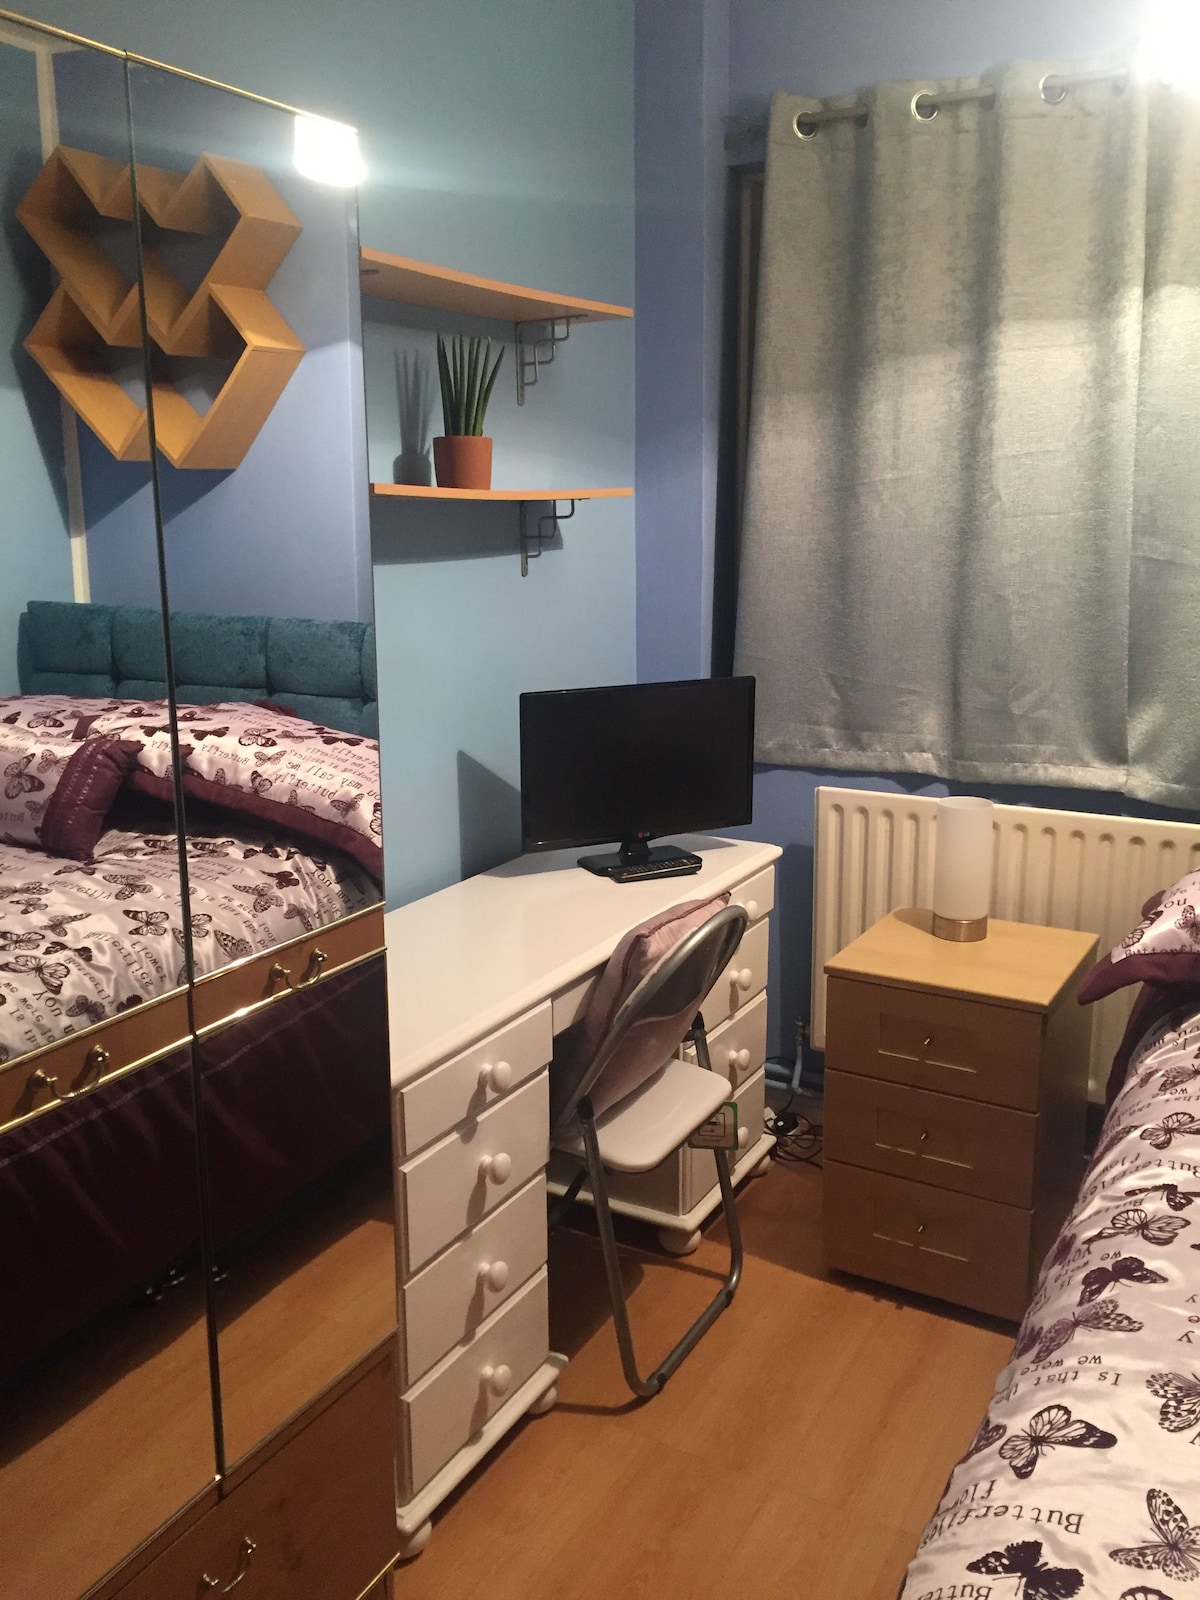 Double Room, Stockwell - 10 mins to Central London